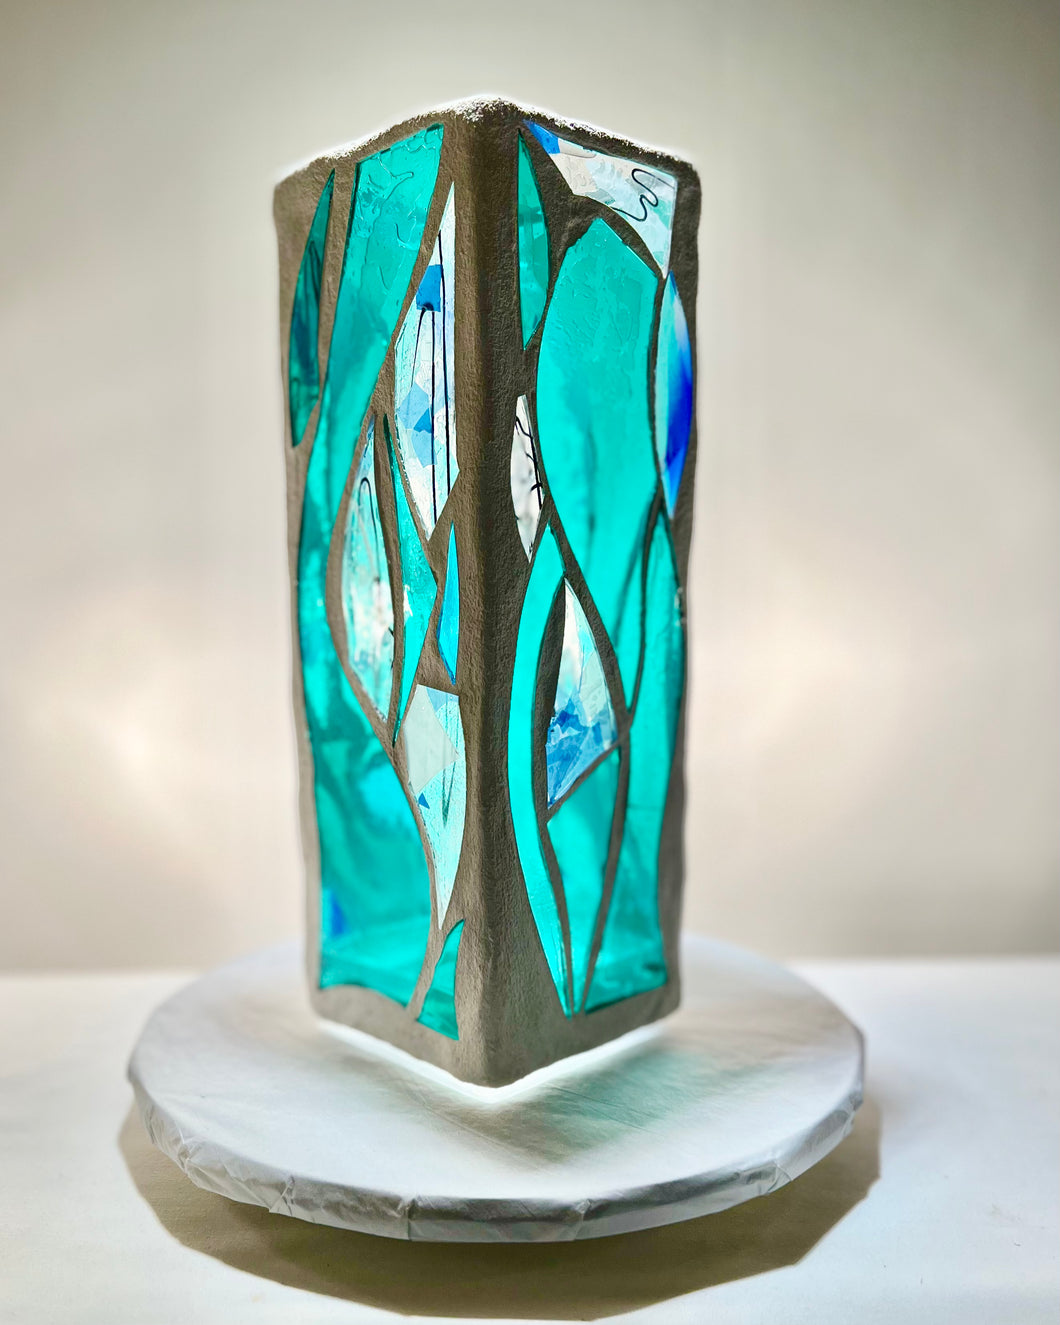 Big Green Sister OHO, Candle, candle holder, green and blue stained glass, white grout, 12x4x4